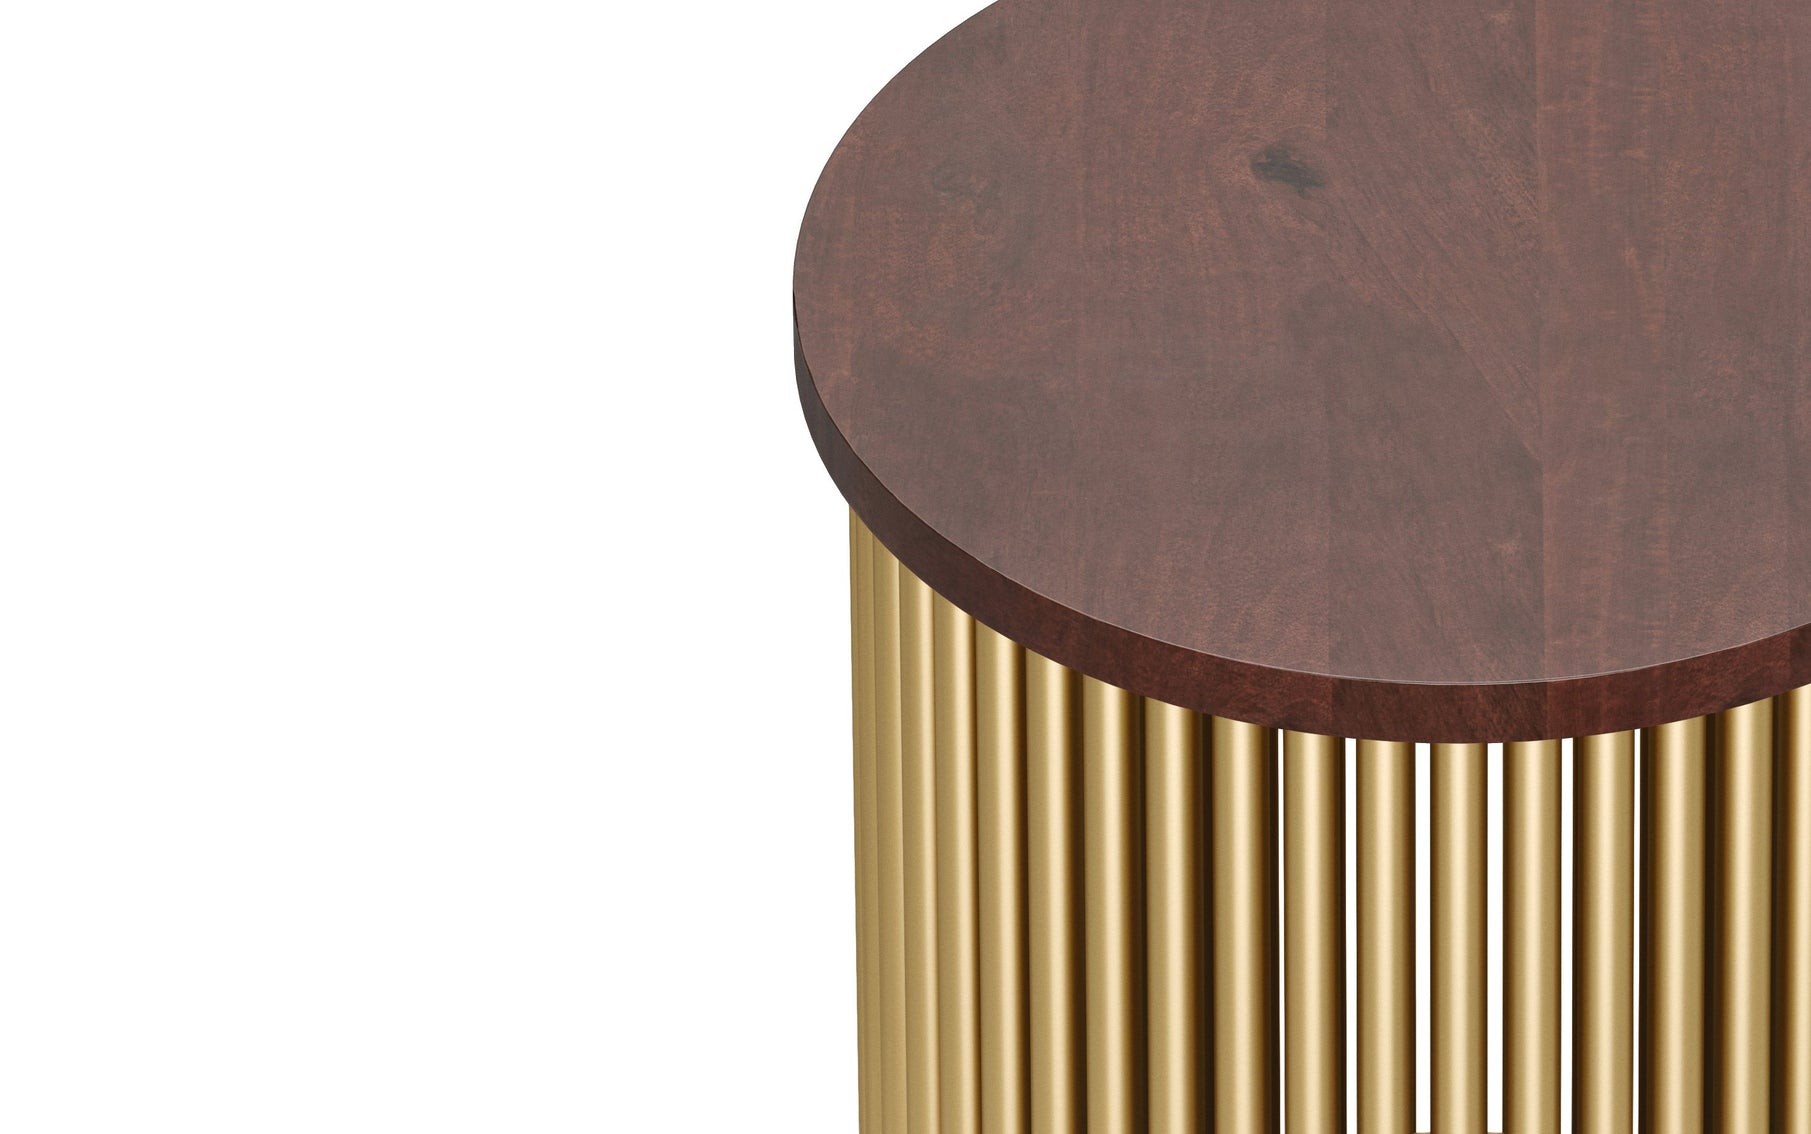 Cognac and Gold Wood | Demy Metal and Wood Accent Table